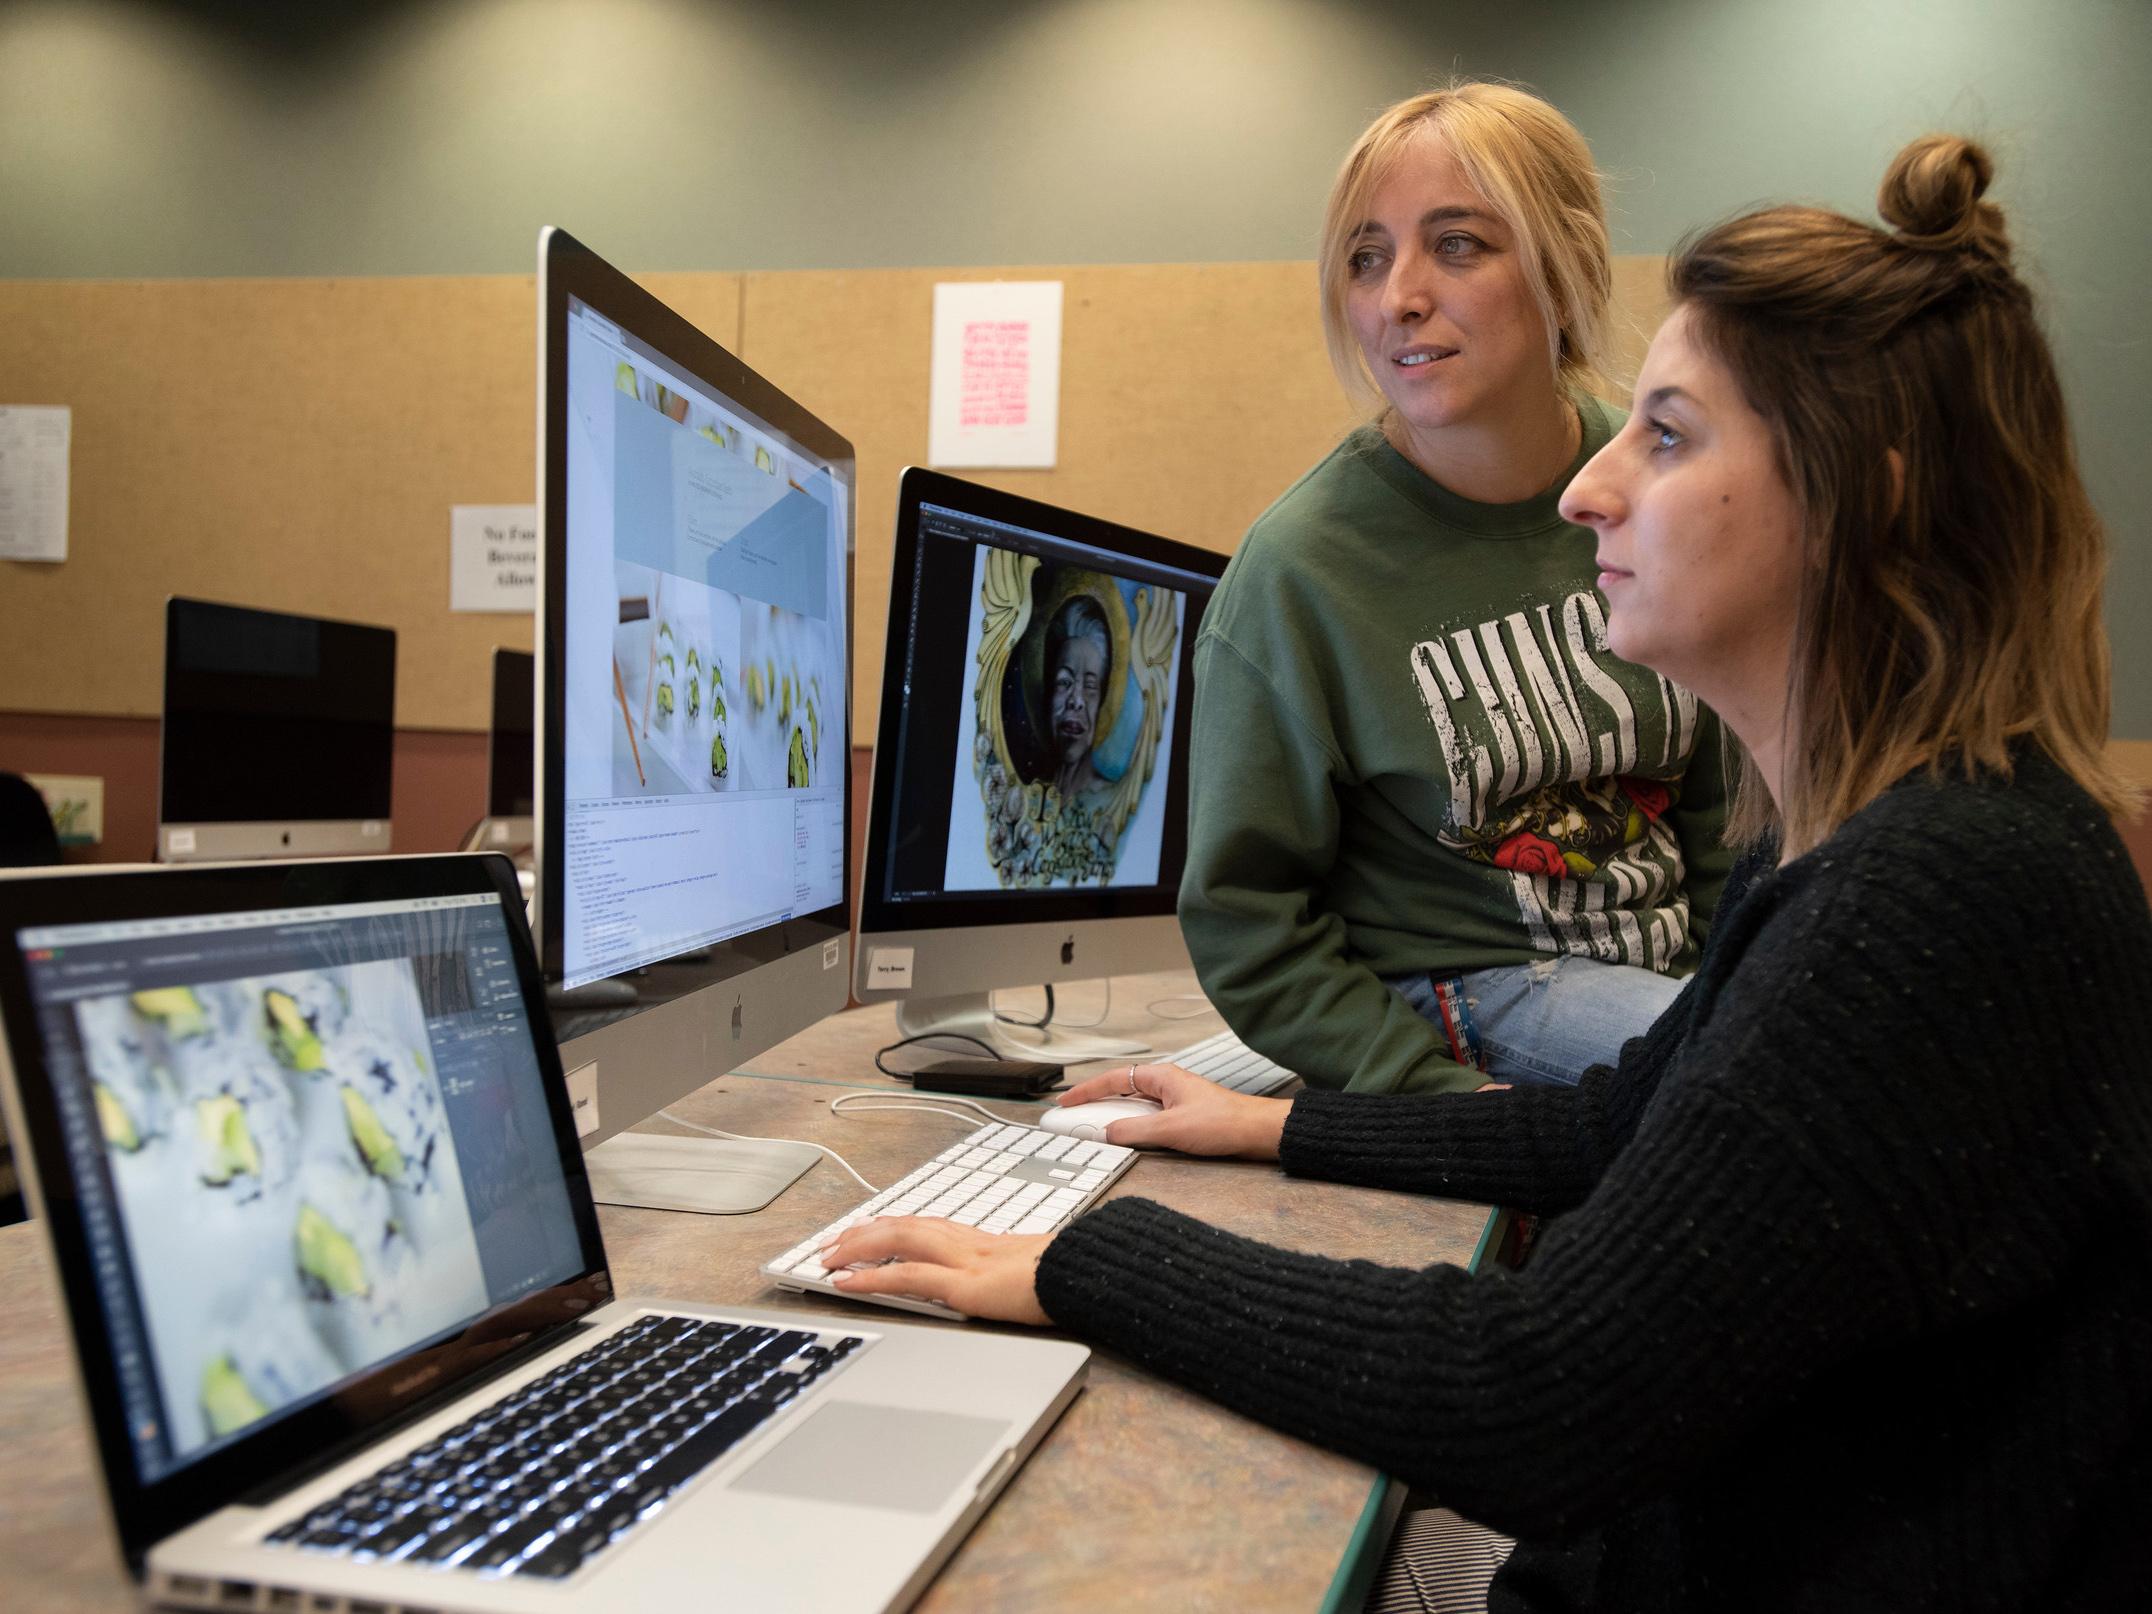 Two students work on digital images in a graphic design lab